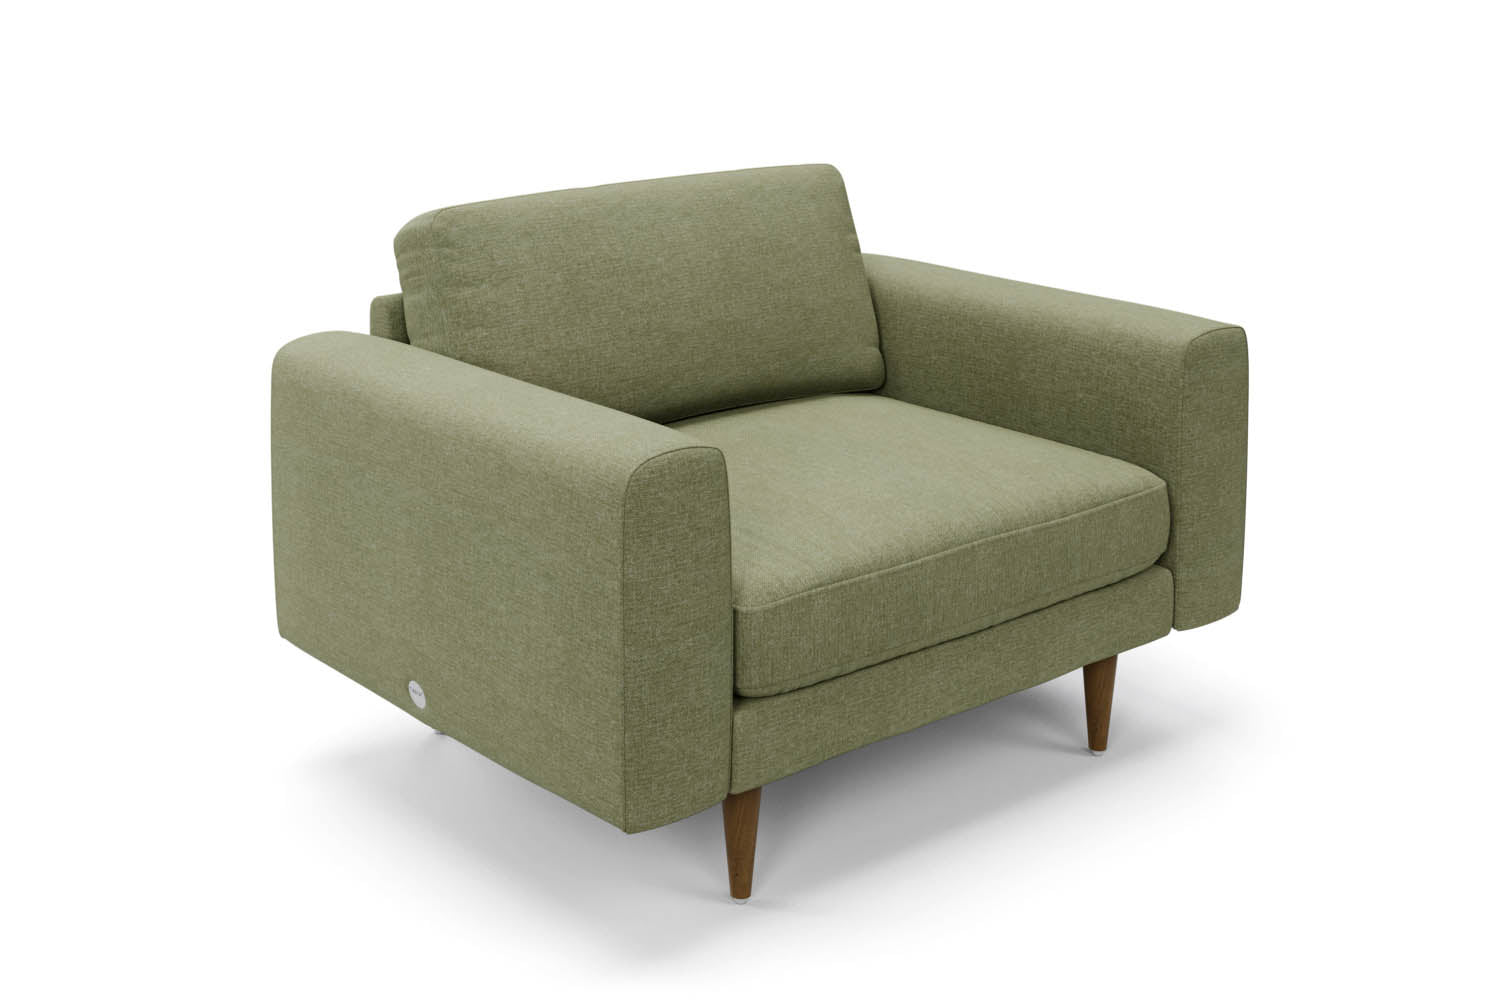 The Big Chill Snuggler in Sage Chenille with brown legs